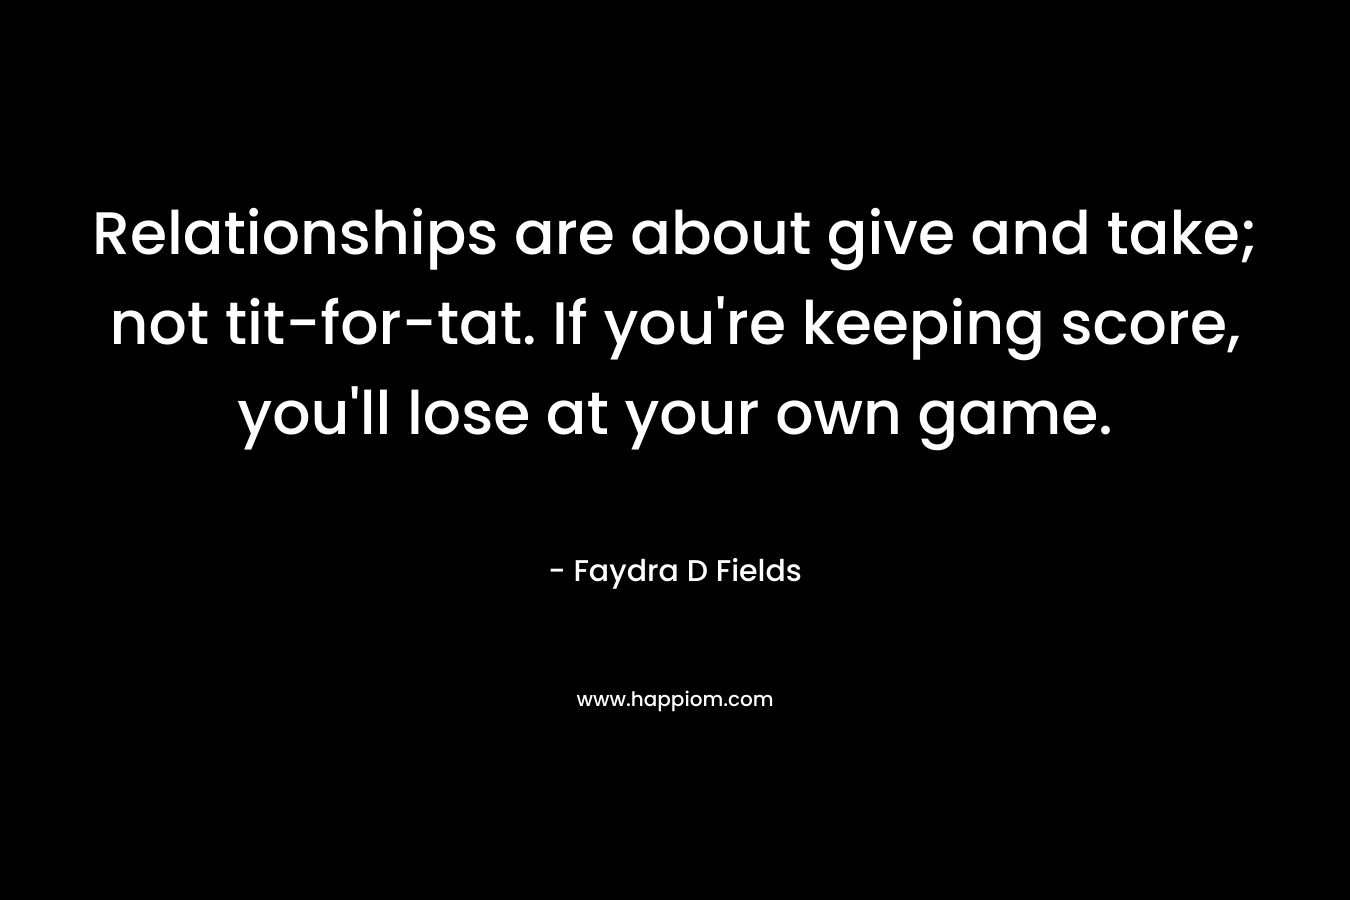 Relationships are about give and take; not tit-for-tat. If you're keeping score, you'll lose at your own game.